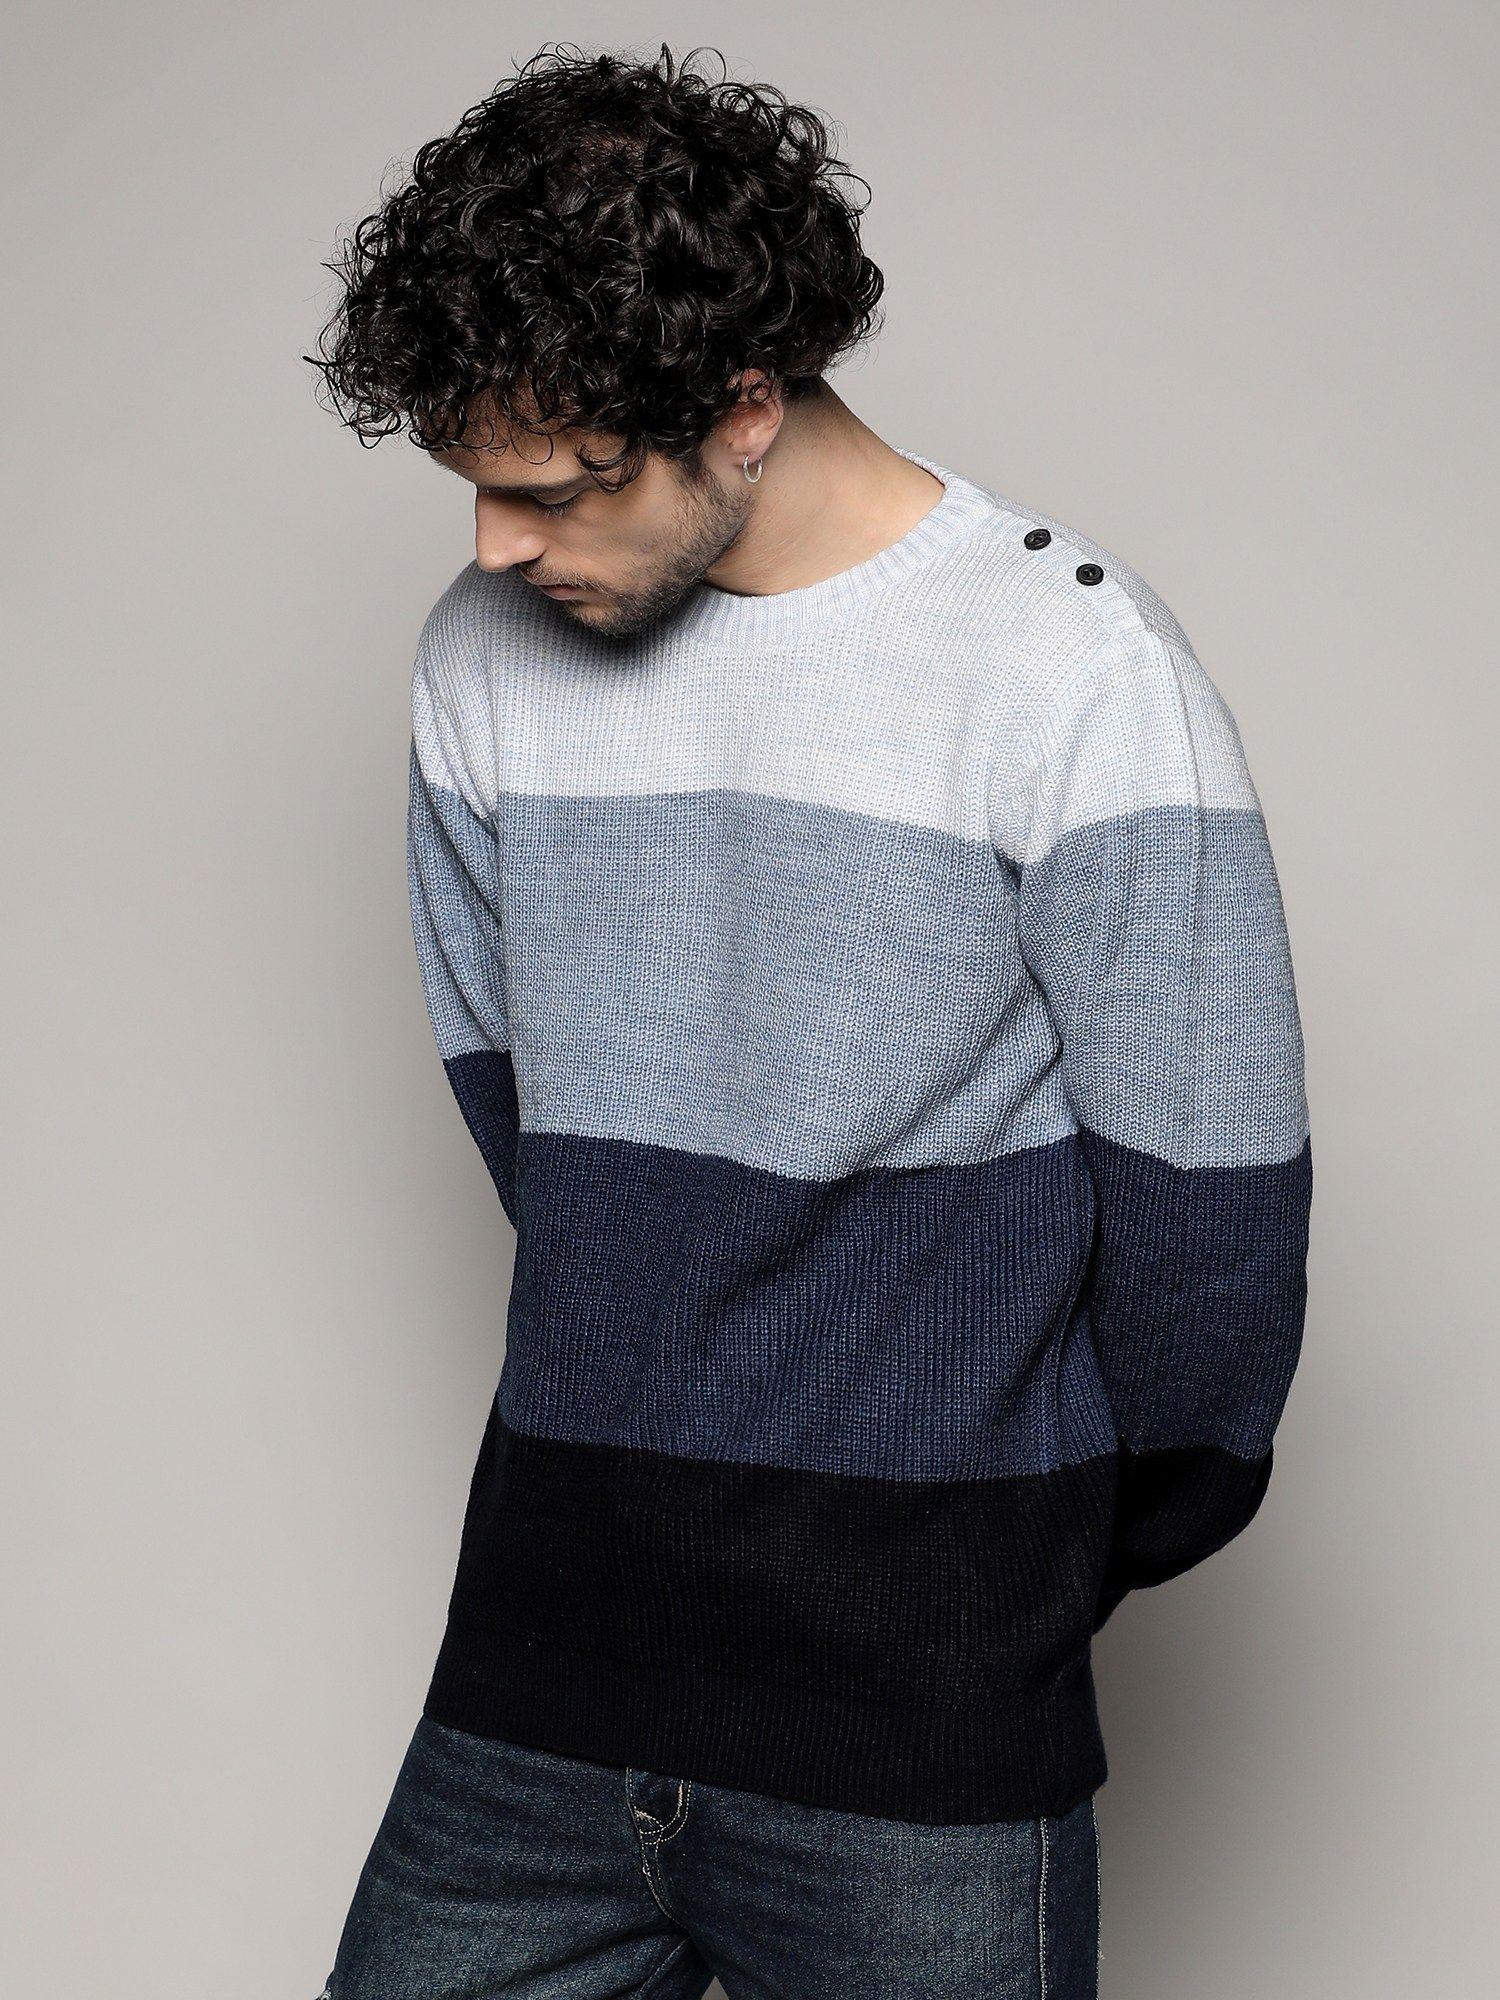 mens-navy-blue-&-icy-blue-contrast-panel-sweater